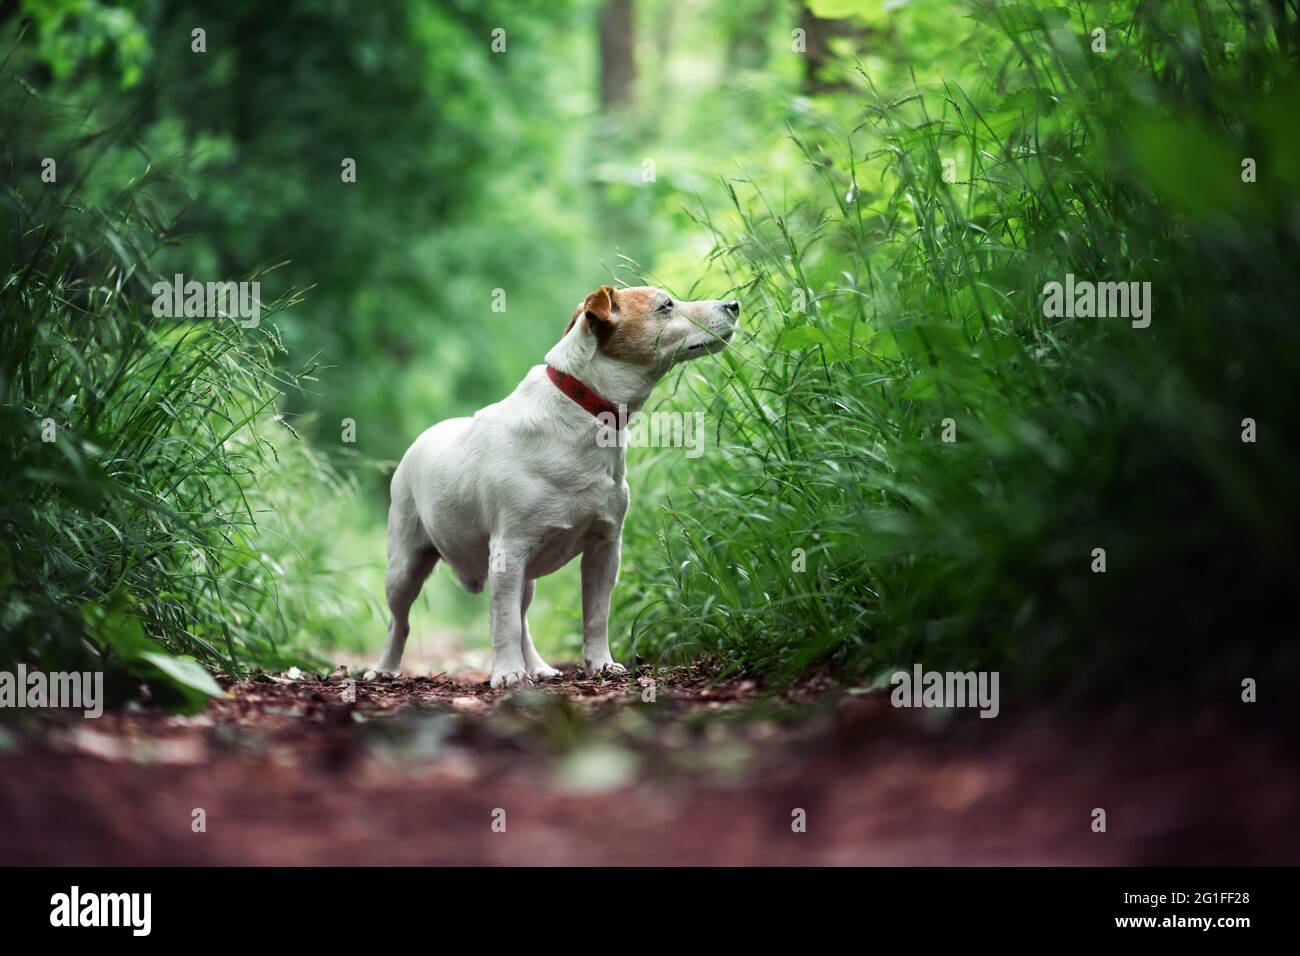 Jack russel terrier dog in green spring forest with lush foliage. Animal and nature photography Stock Photo